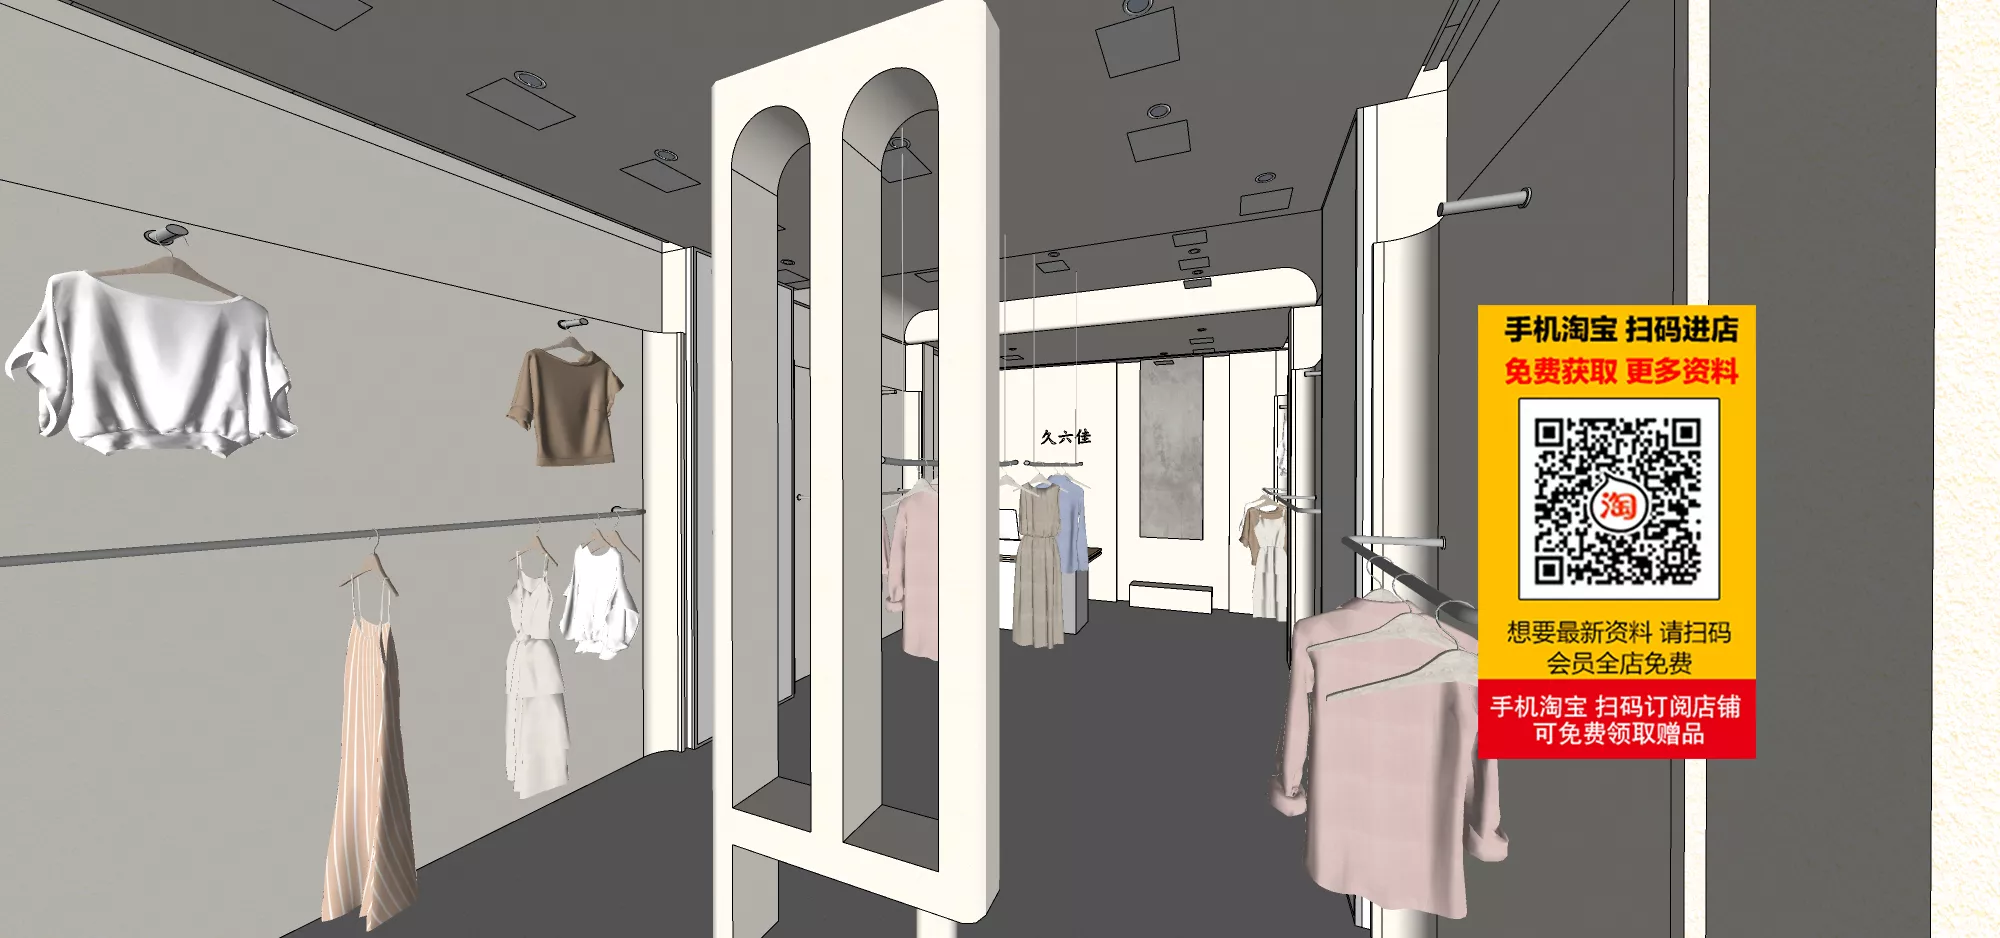 WABI SABI CLOTHING STORE - SKETCHUP 3D SCENE - VRAY OR ENSCAPE - ID17612